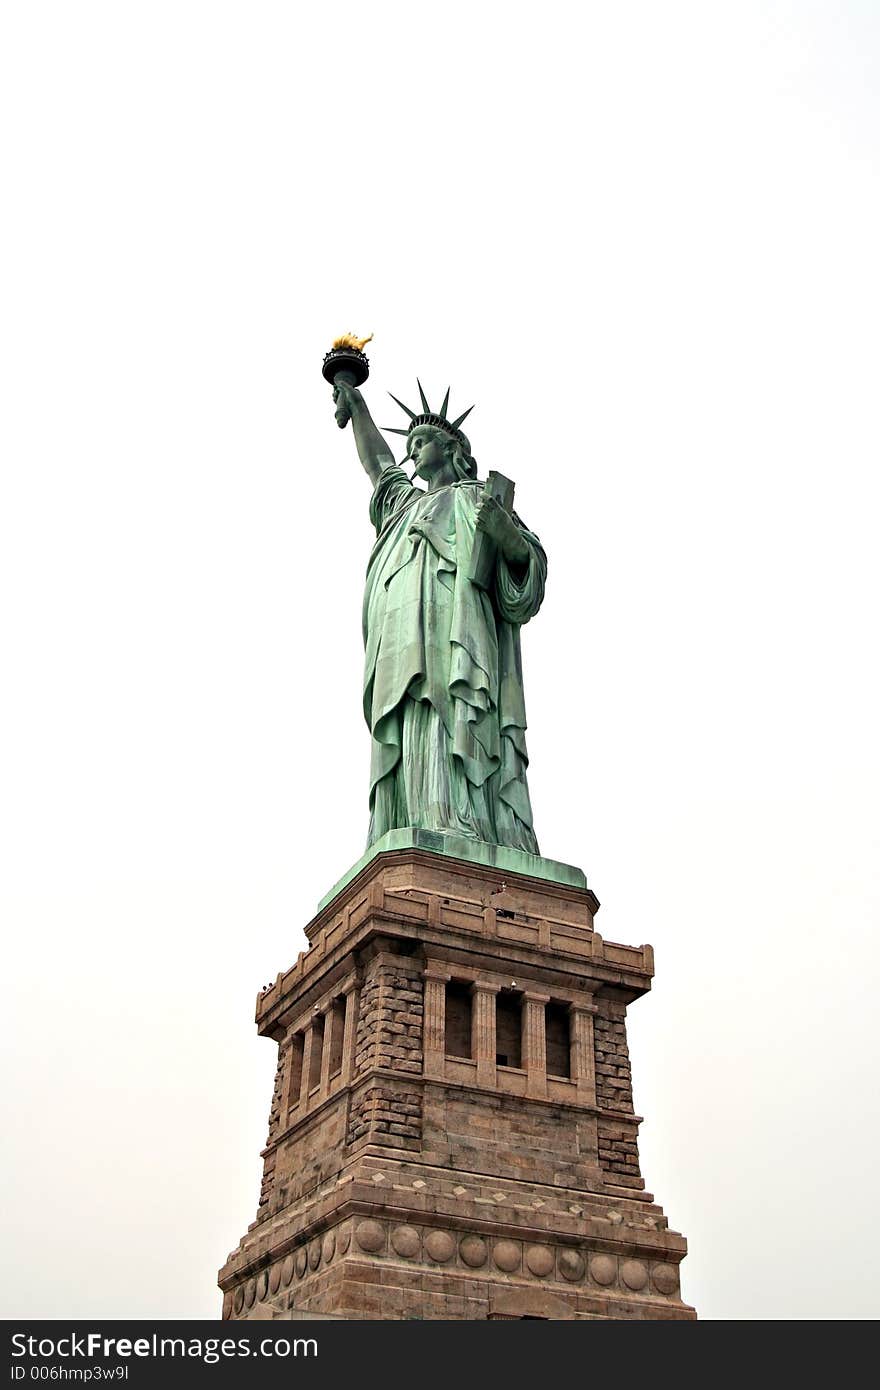 Statue of Liberty with white background. Statue of Liberty with white background